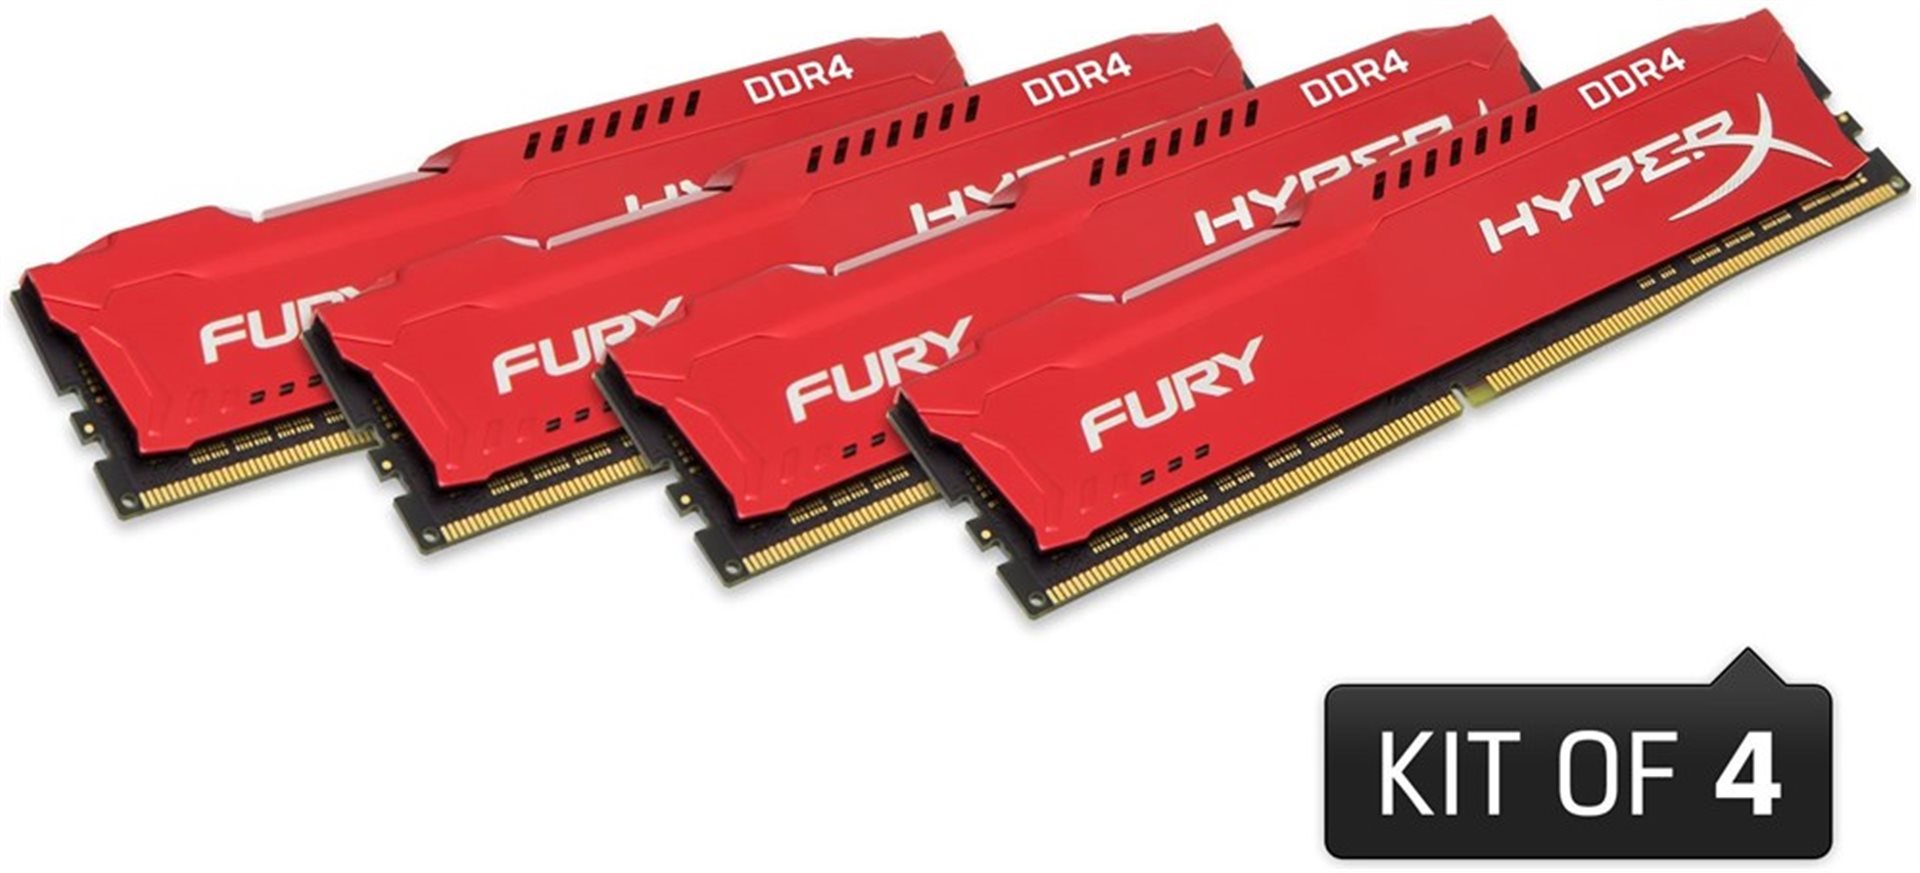 KINGSTON 32GB 2400MHz DDR4 CL15 DIMM (Kit of 4) 1Rx8 HyperX FURY Red